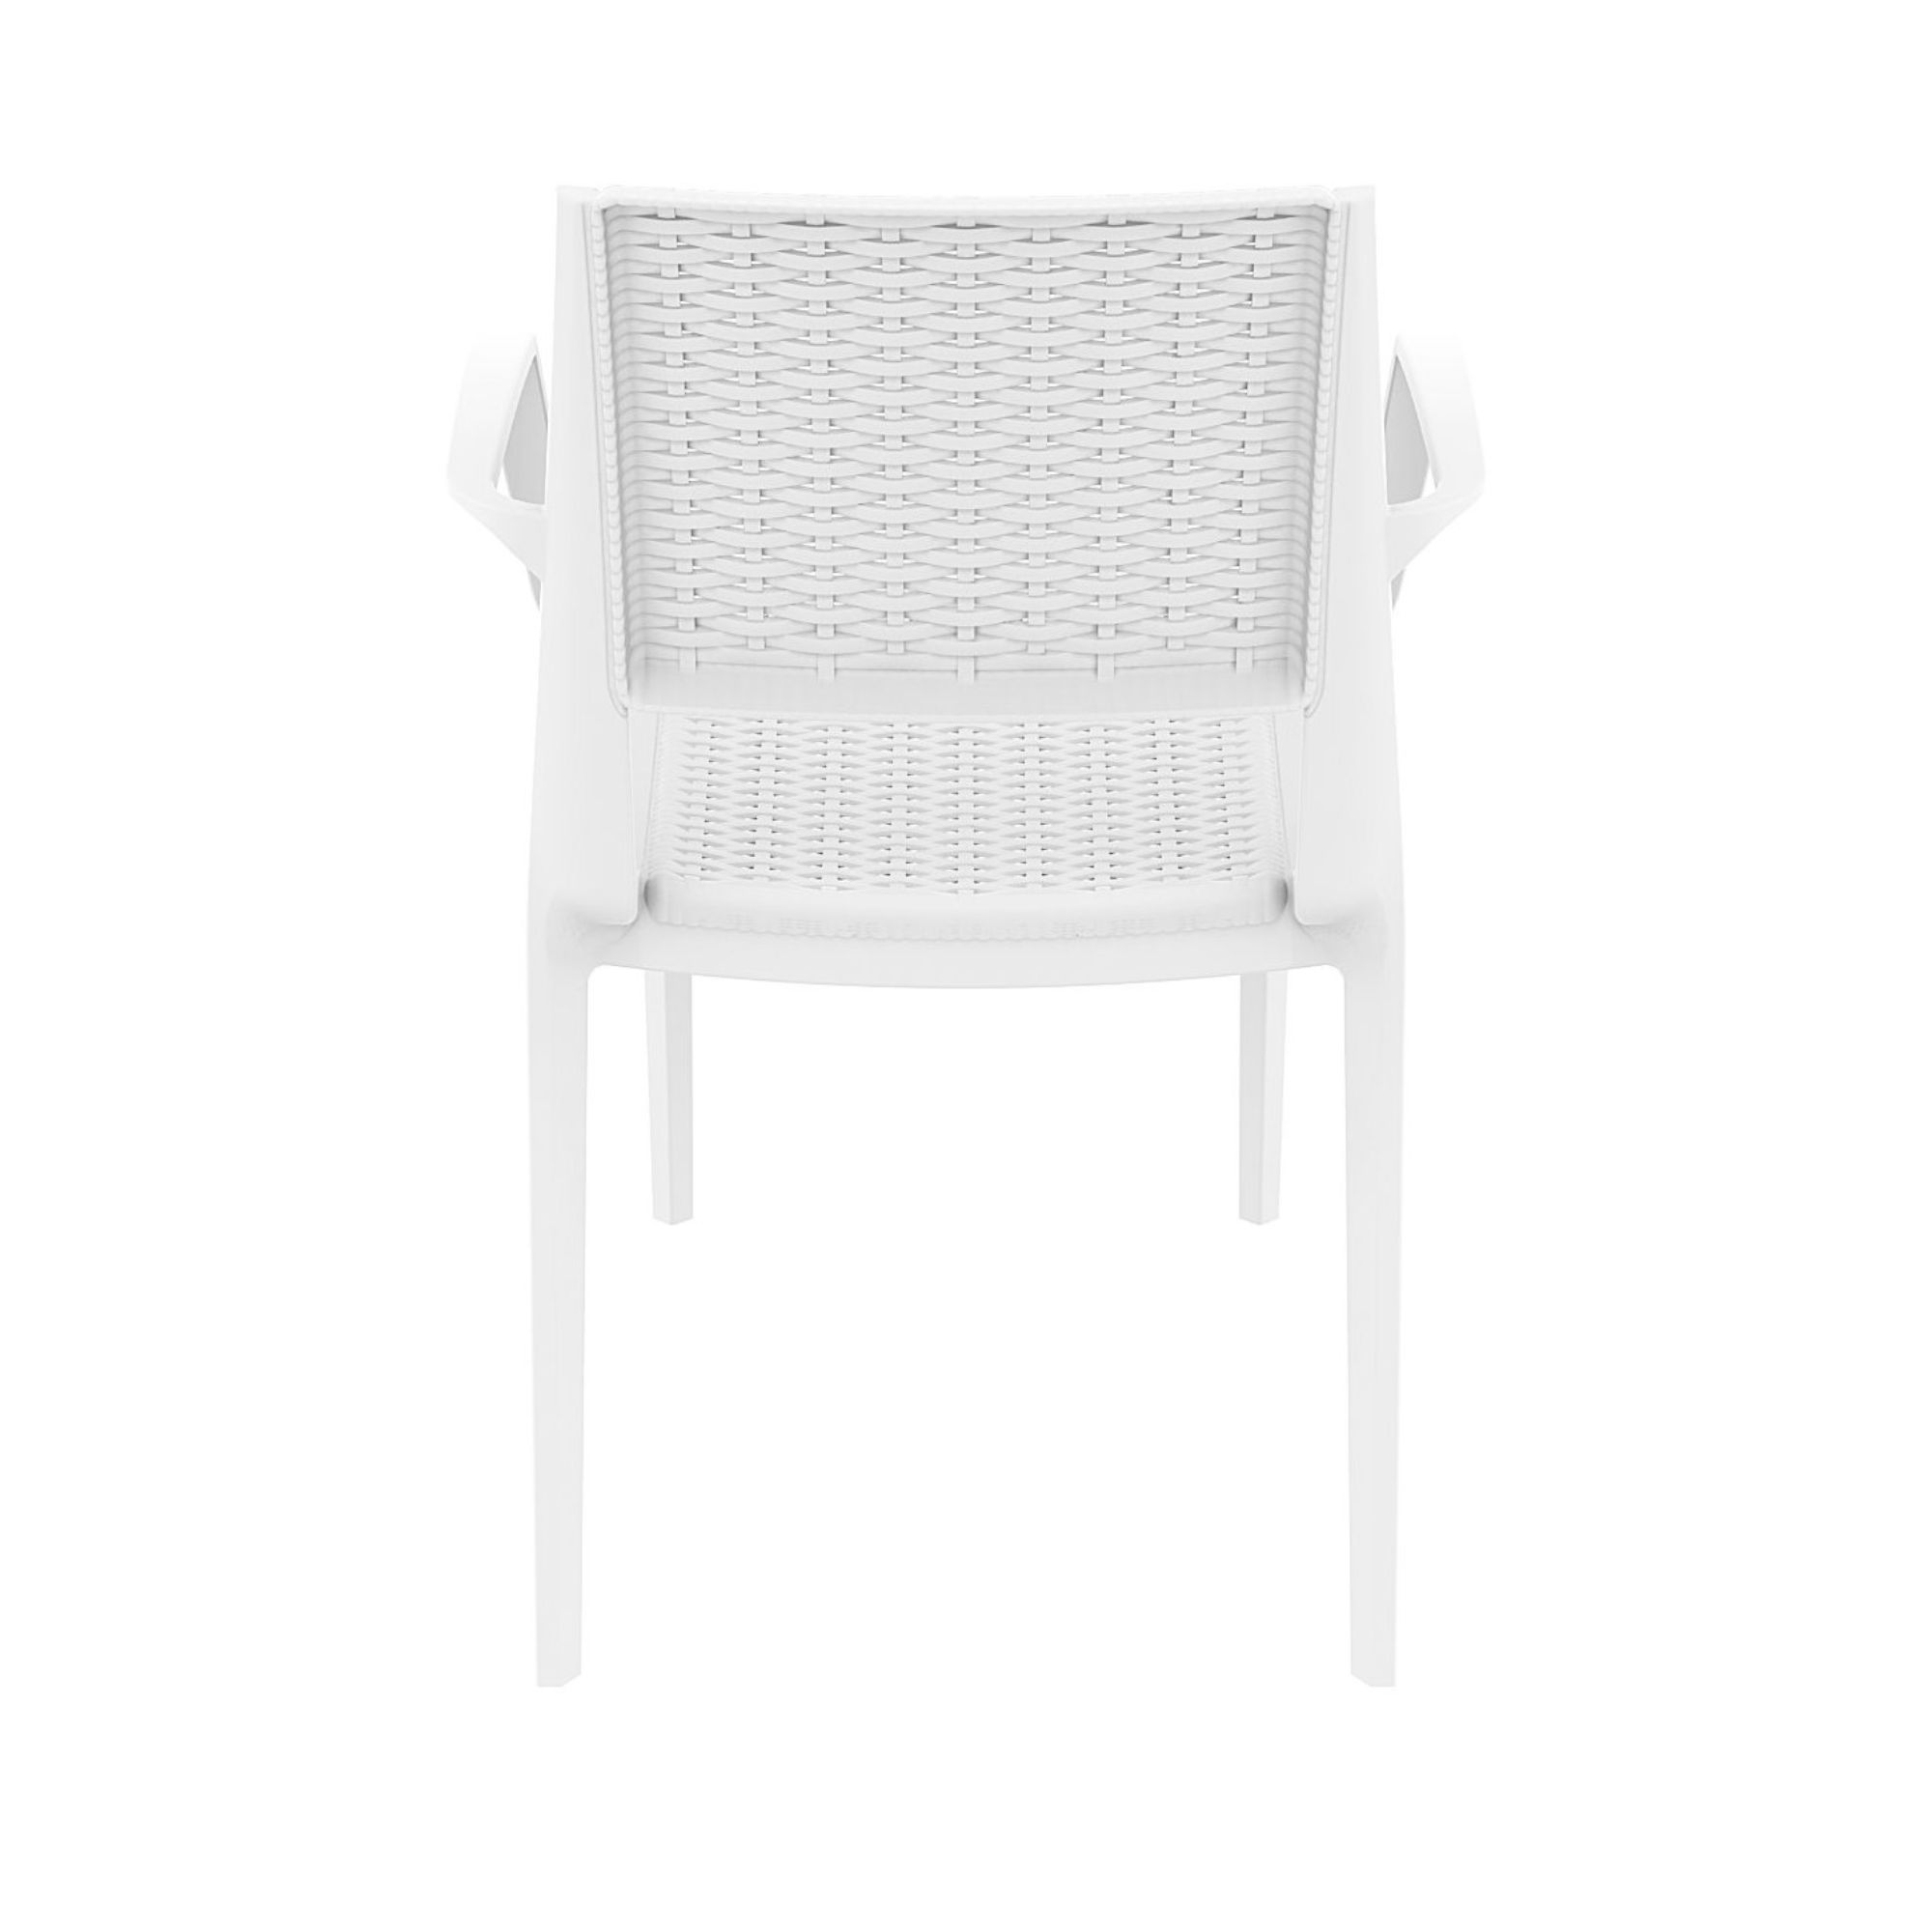 Luxury Commercial Living 32" White Outdoor Patio Wickerlook Dining Arm Chair - image 5 of 9